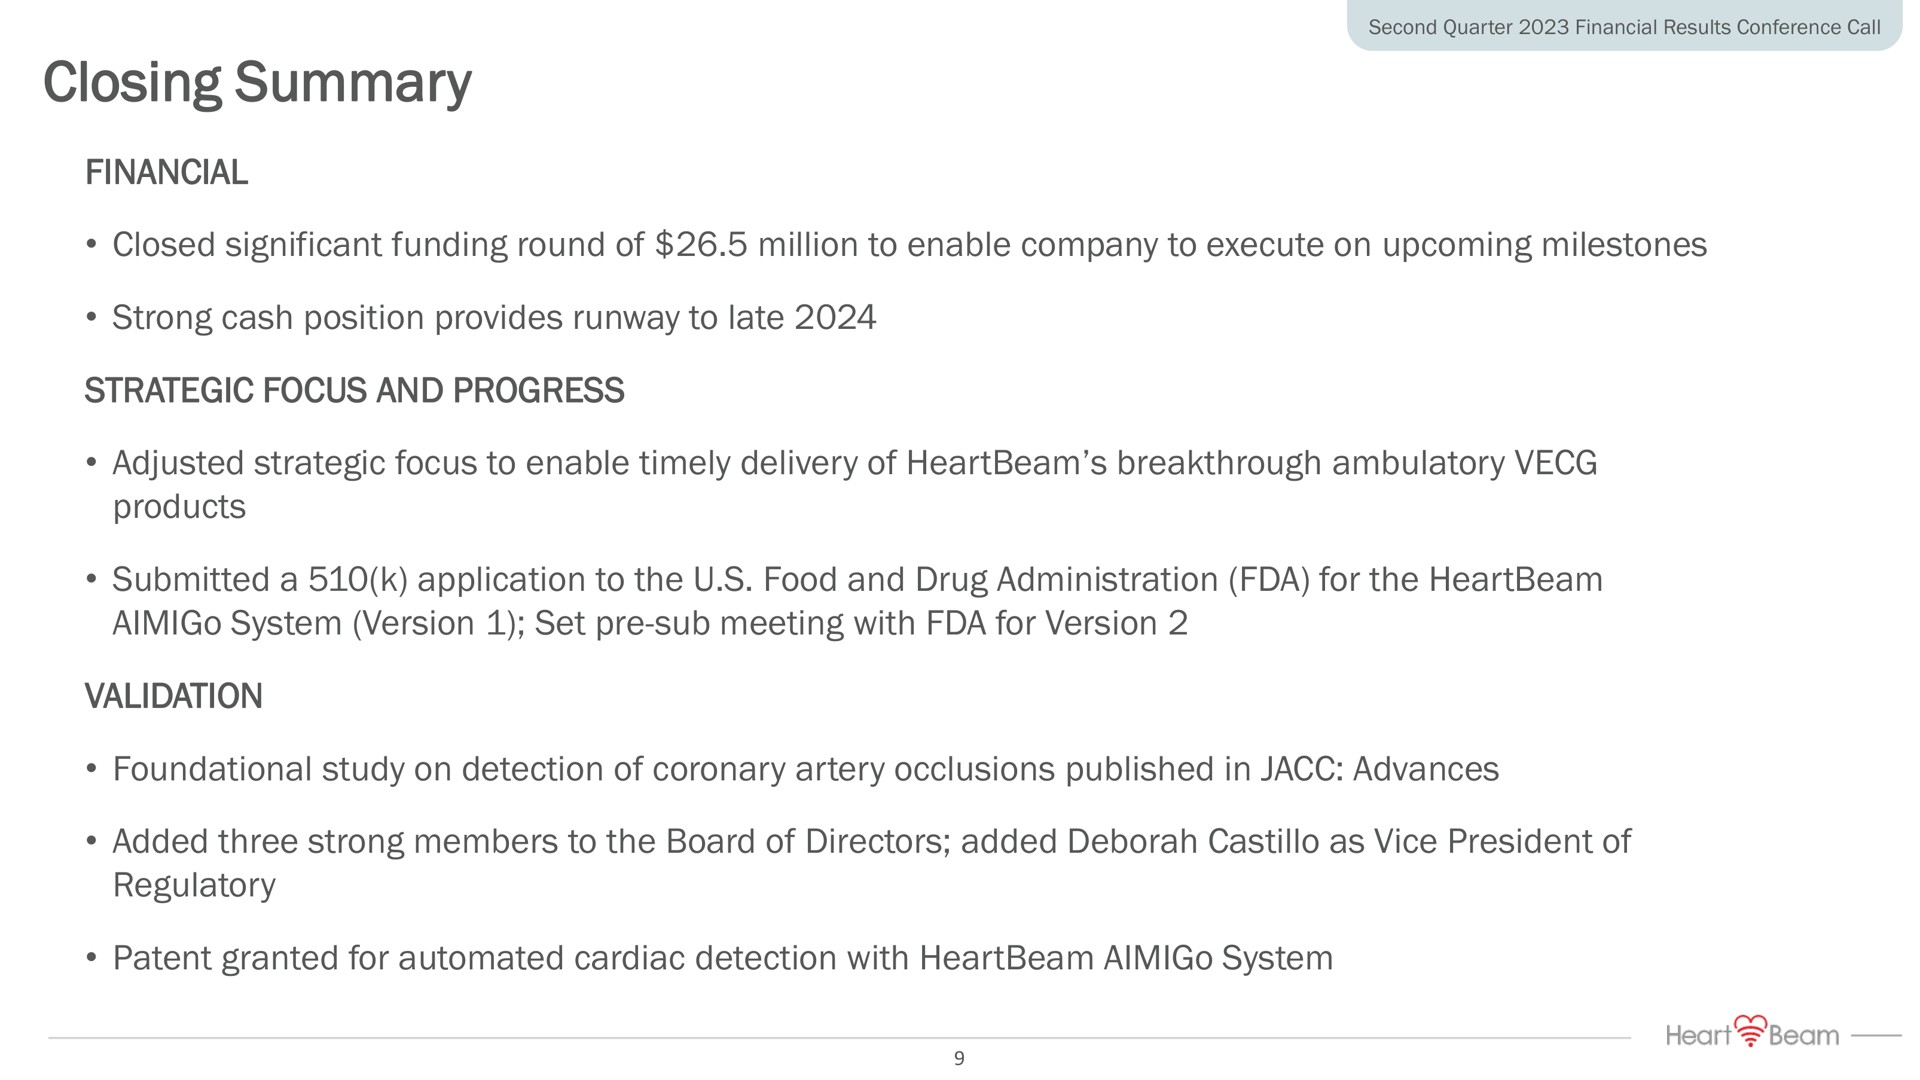 closing summary financial closed significant funding round of million to enable company to execute on upcoming milestones strong cash position provides runway to late strategic focus and progress adjusted strategic focus to enable timely delivery of breakthrough ambulatory products submitted a application to the food and drug administration for the system version set sub meeting with for version validation foundational study on detection of coronary artery occlusions published in advances added three strong members to the board of directors added as vice president of regulatory patent granted for cardiac detection with system | HeartBeam